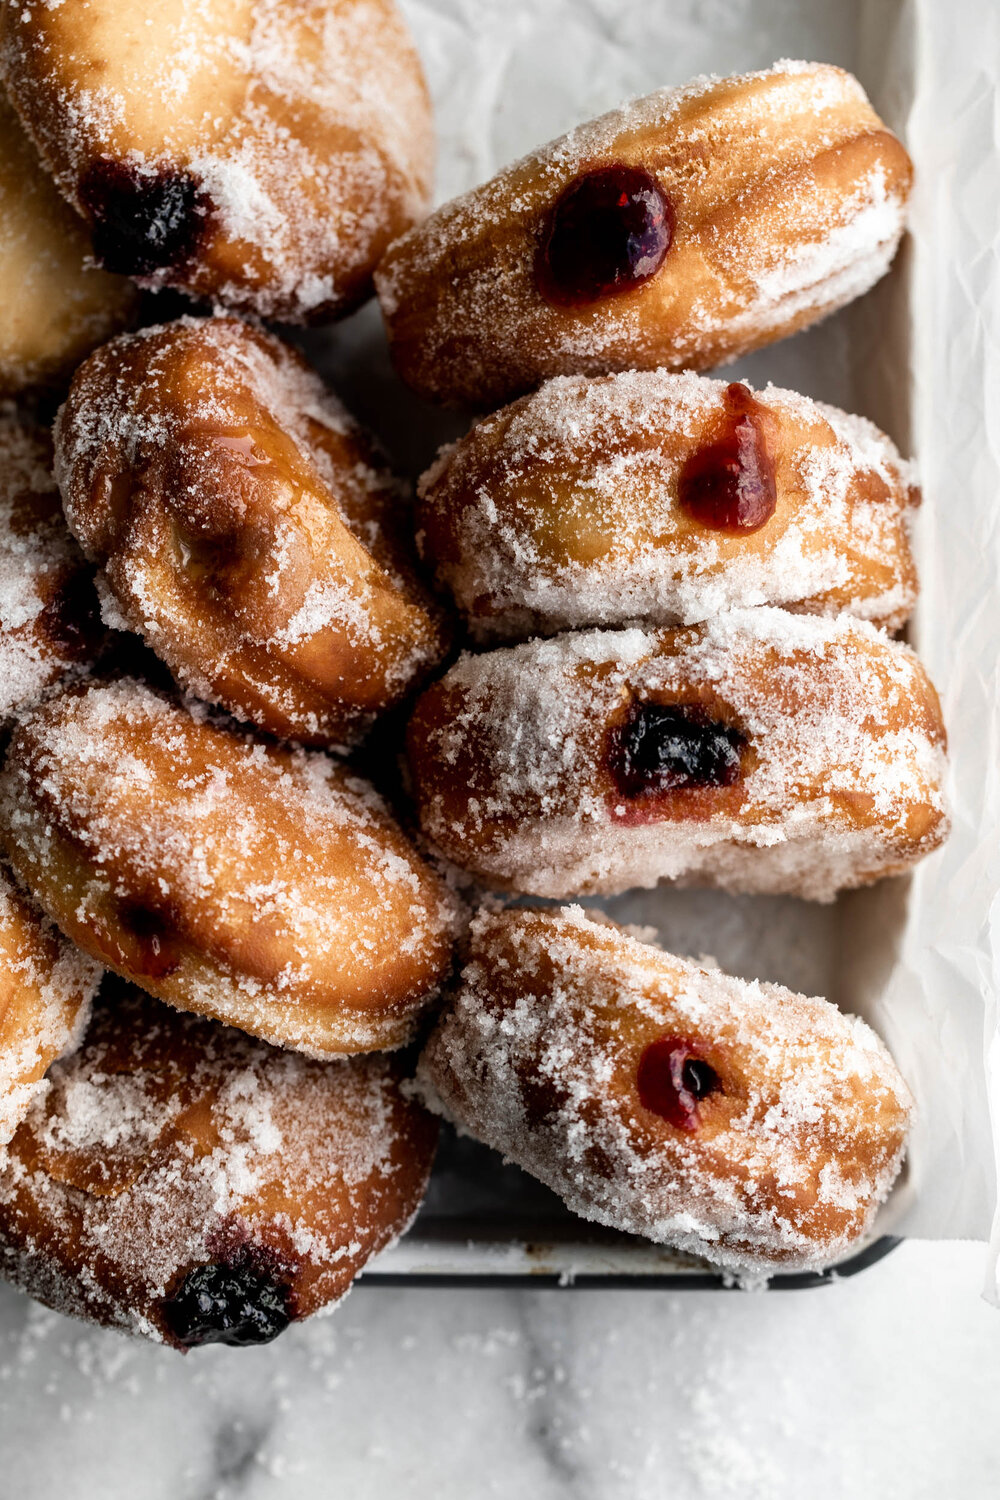 favorite jelly doughnuts at home with Sweet yeast doughnut dough fried and filled with jelly and jams